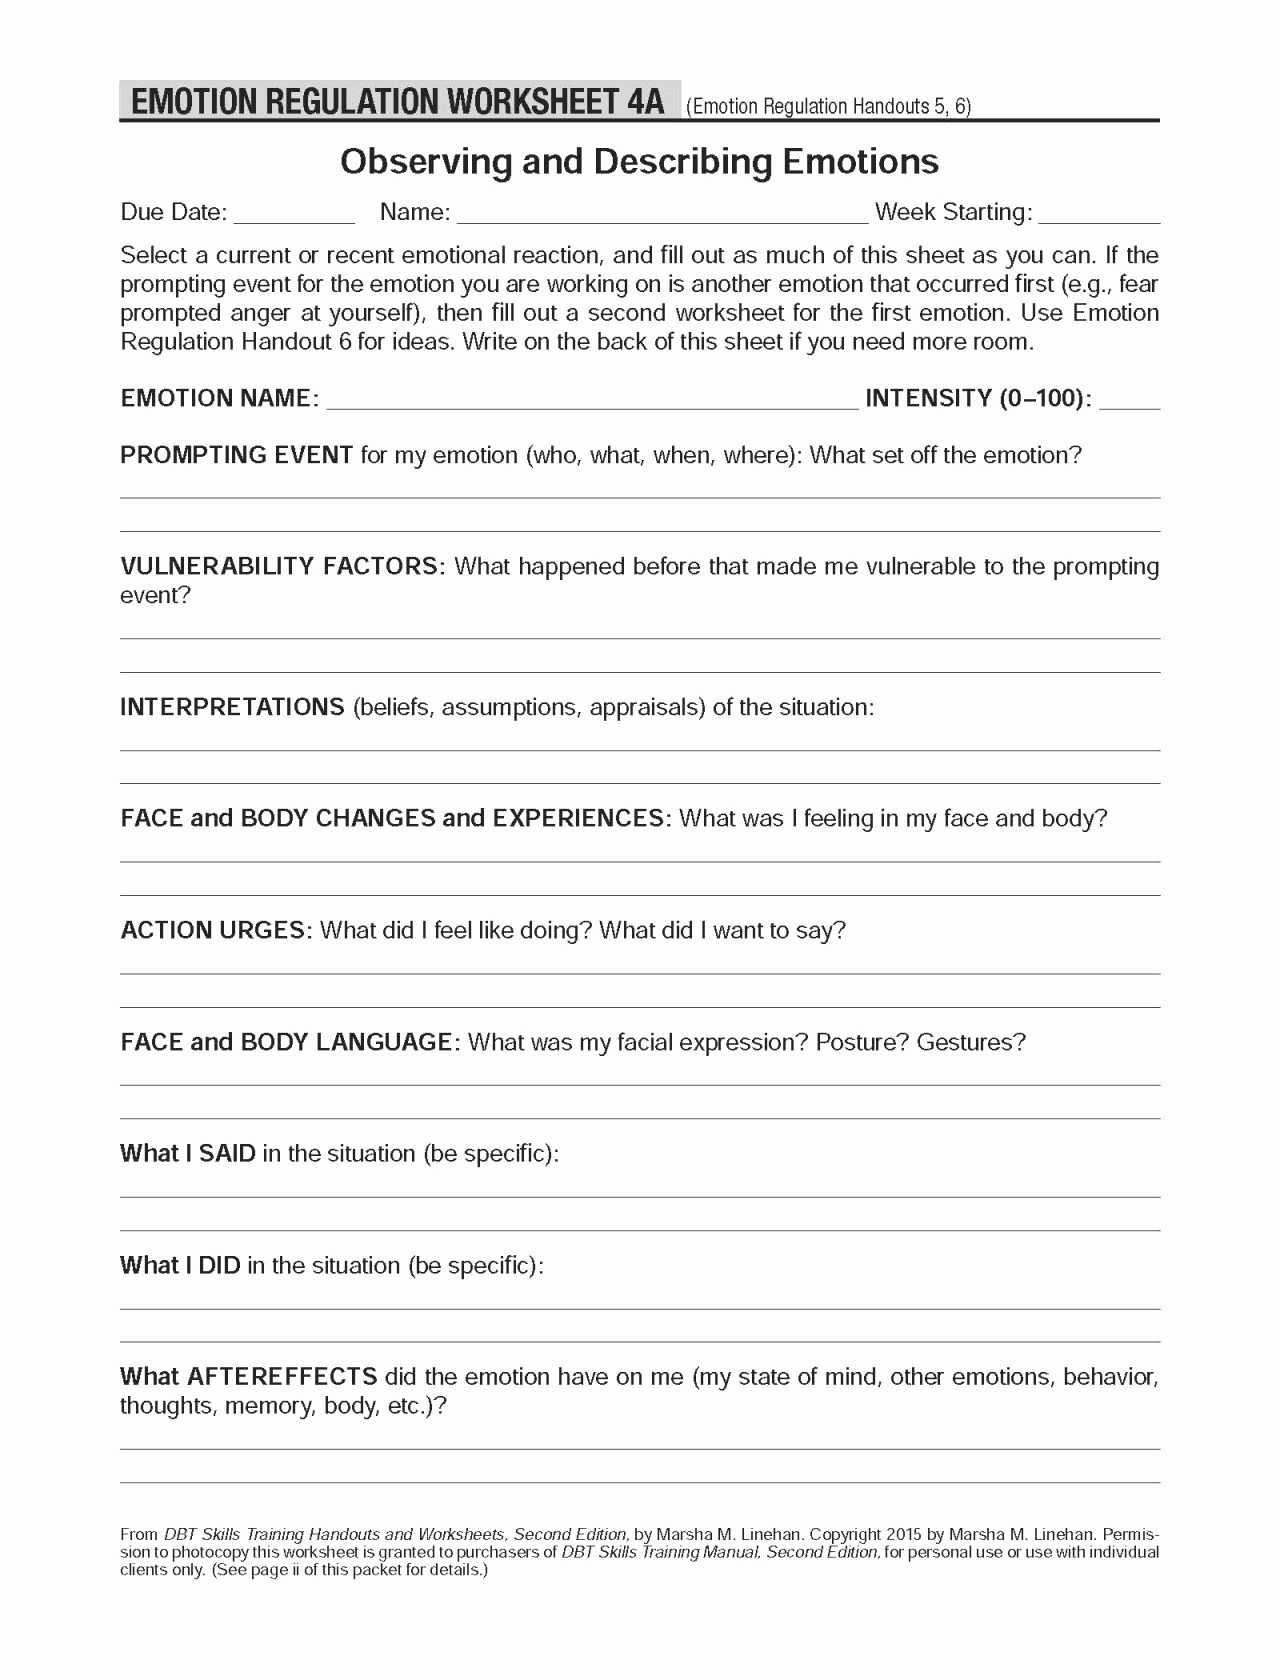 Factor Each Completely Worksheet Answers together with 50 Inspirational Take Charge today Worksheet Answers